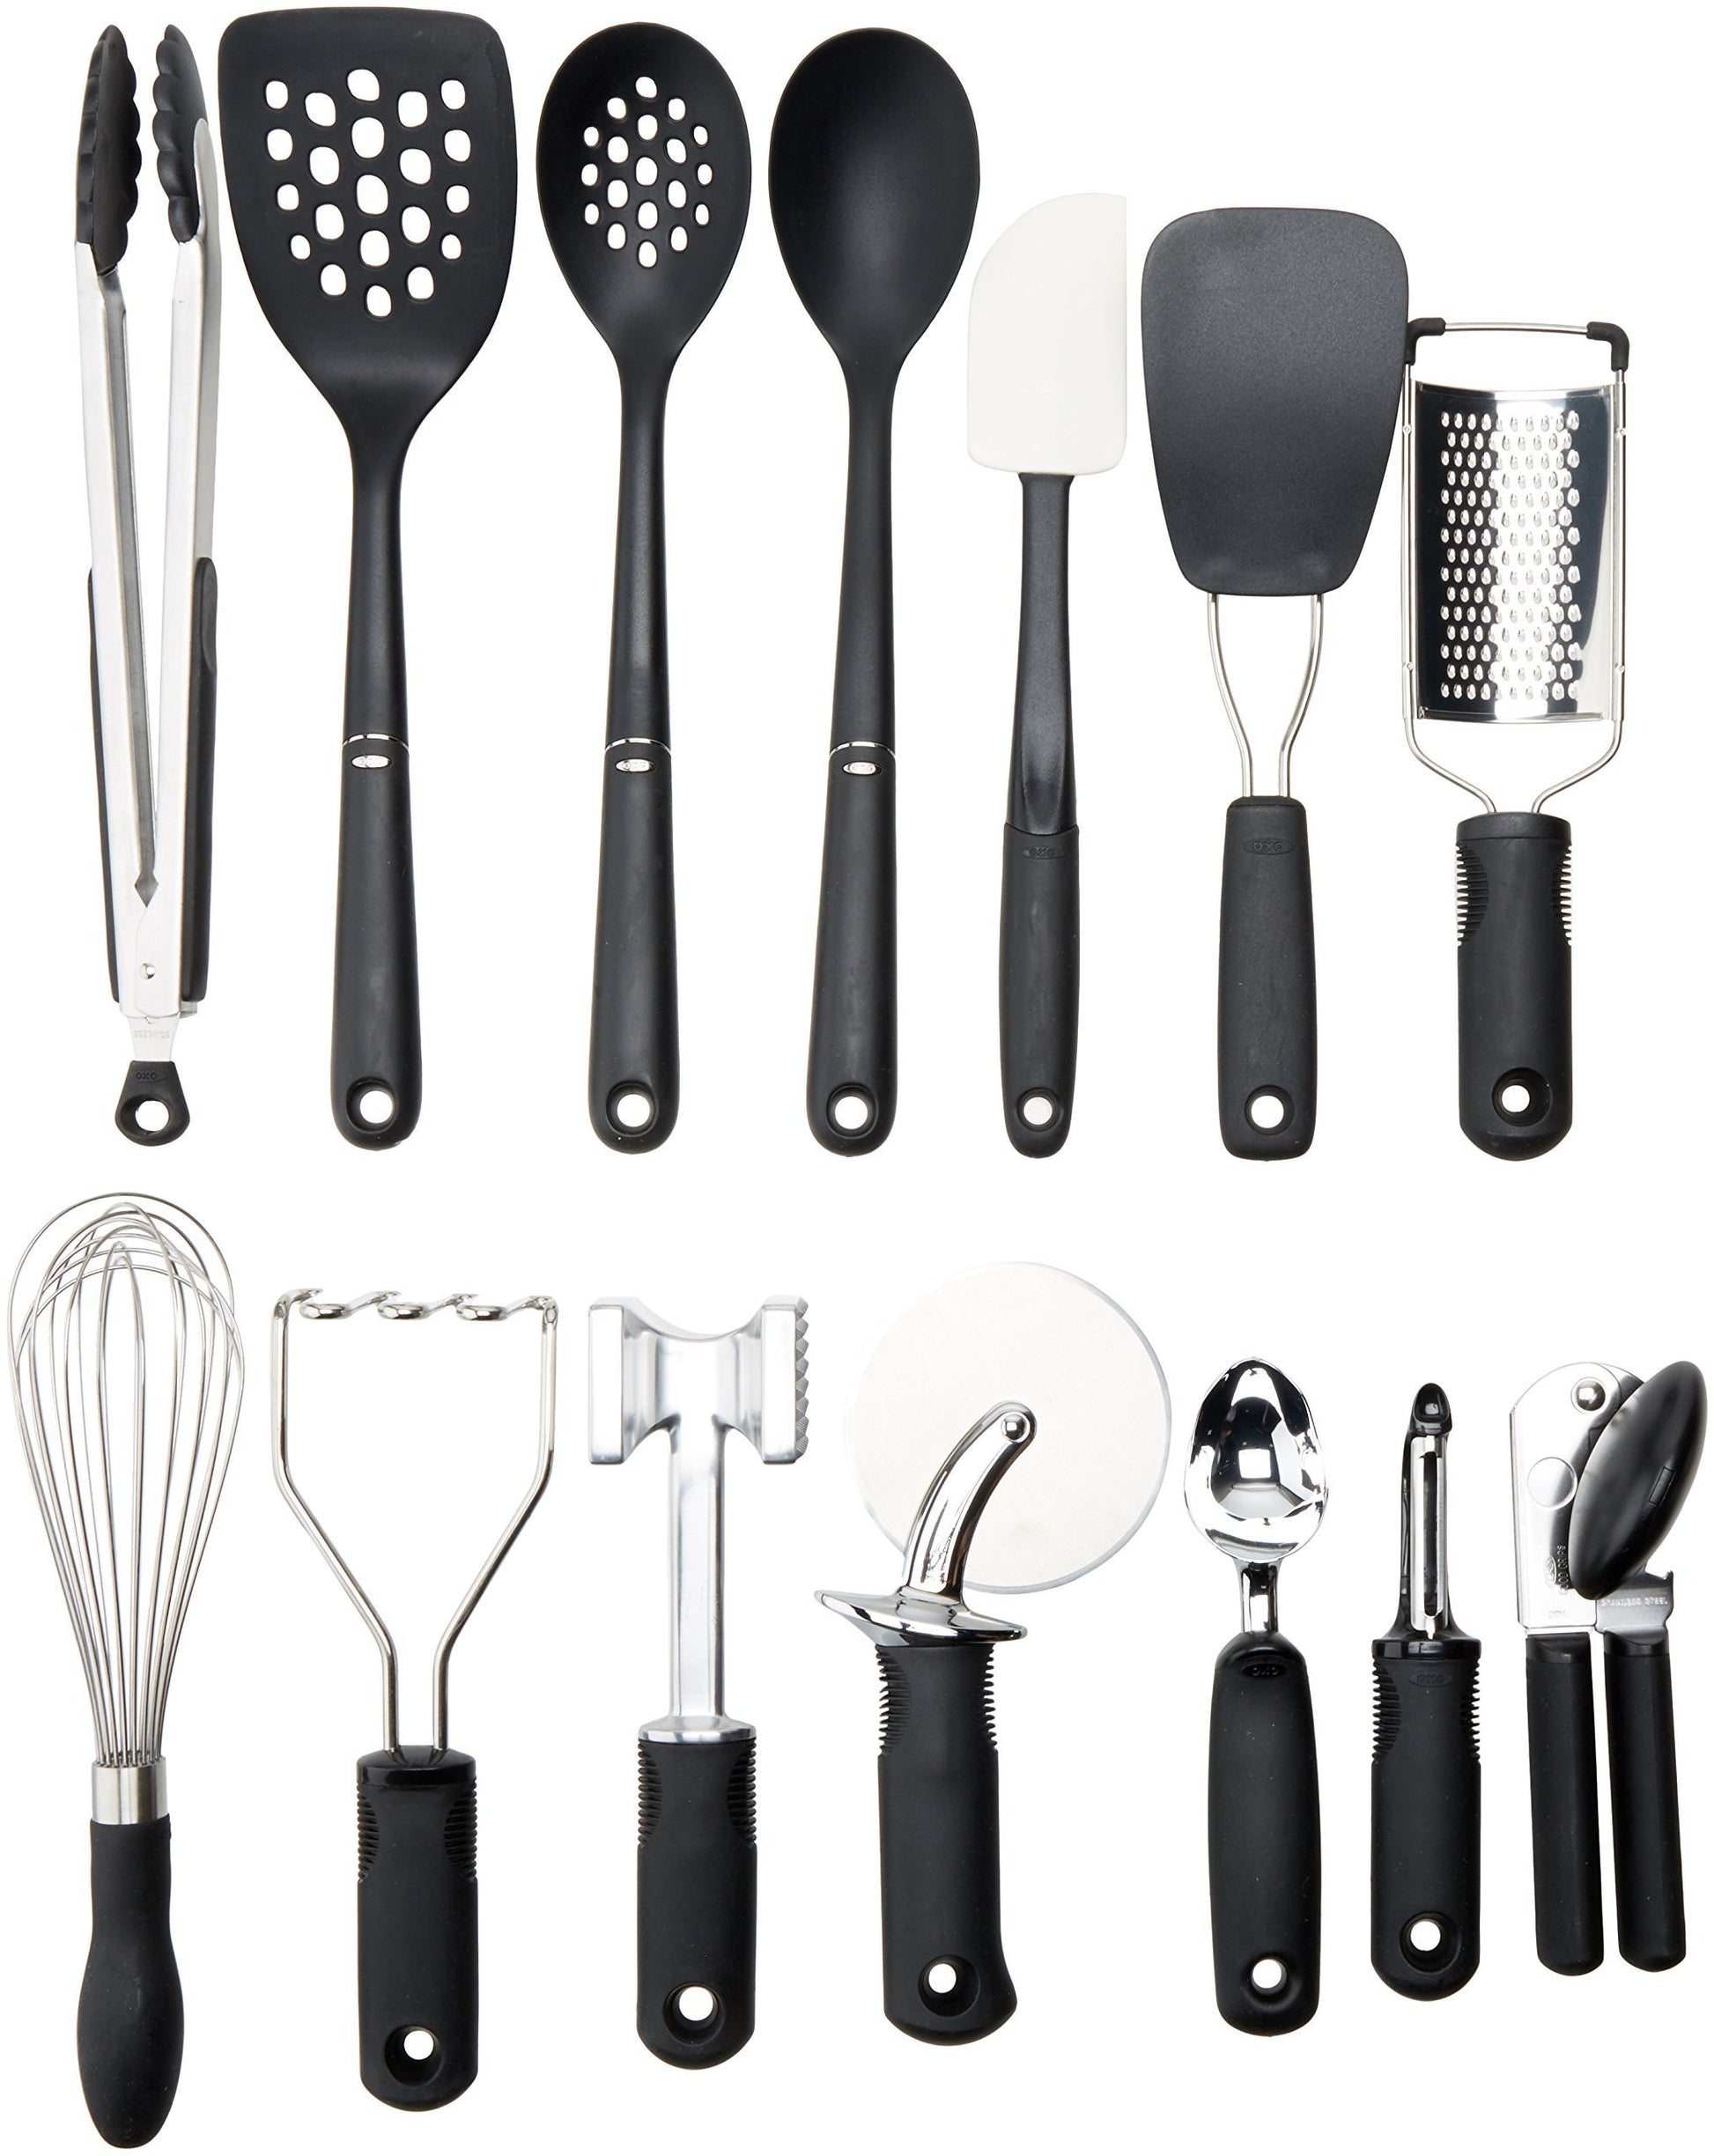 Discover oxo good grips 15 piece everyday kitchen tool set